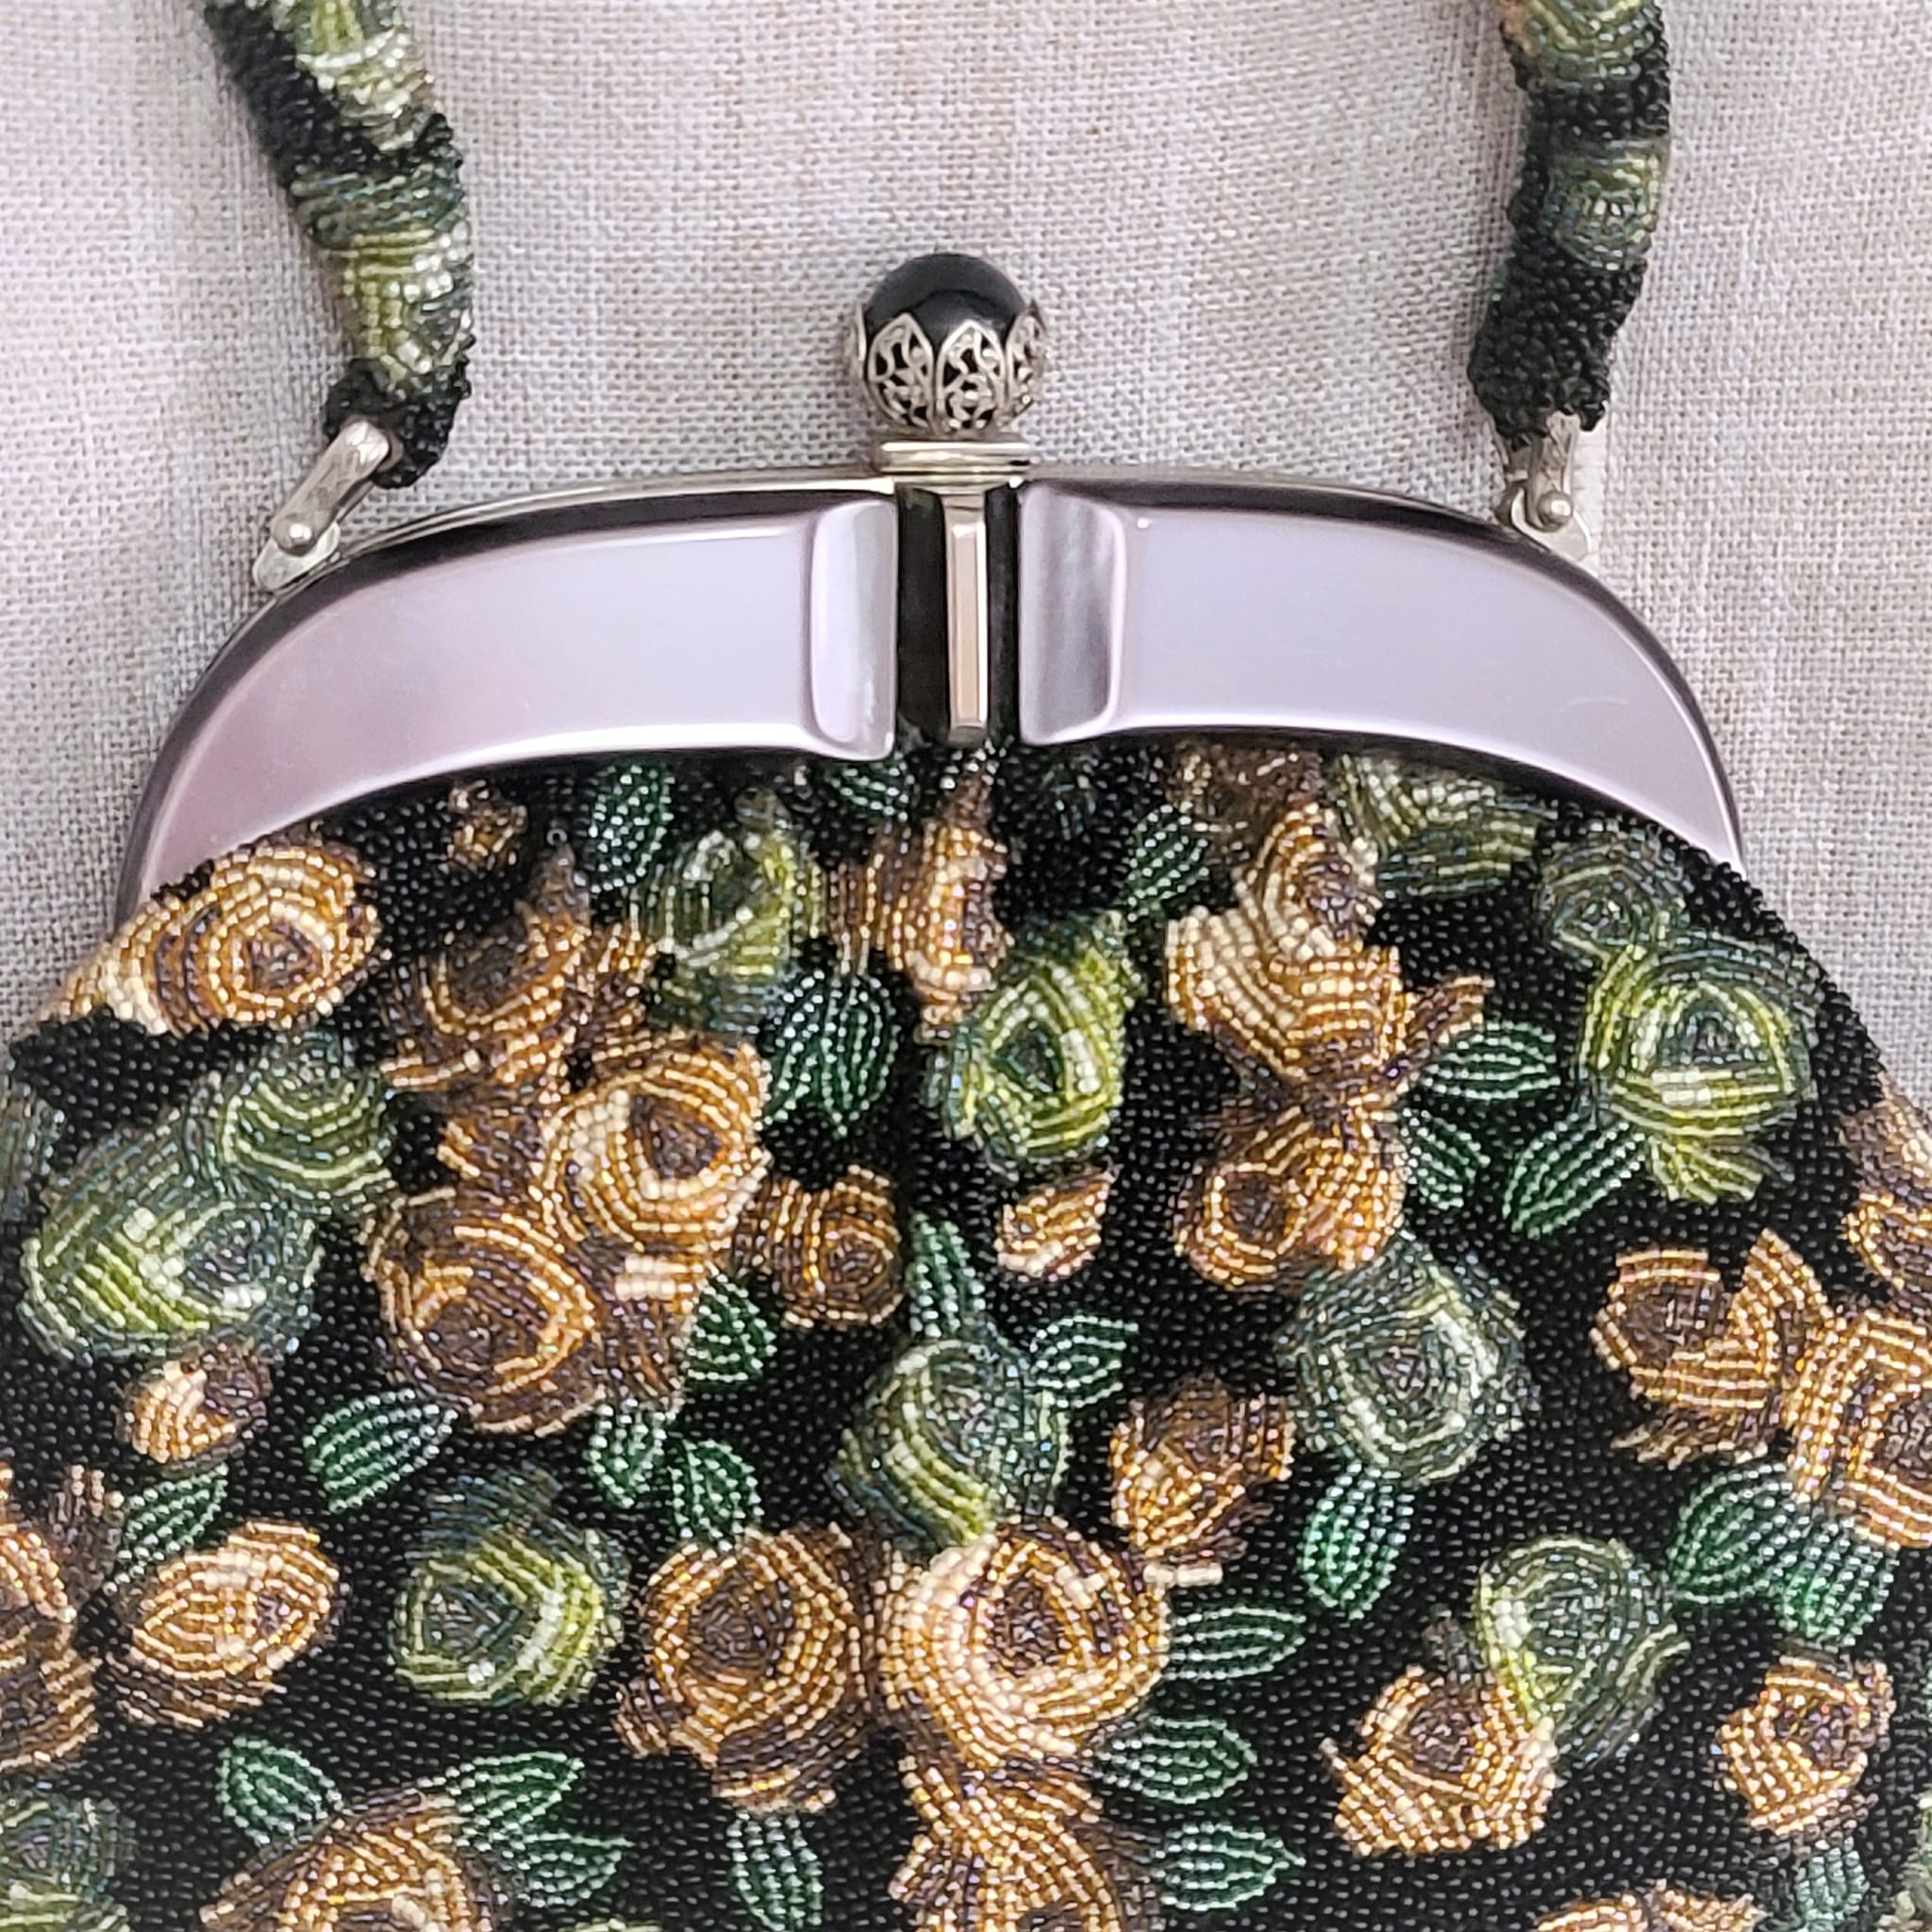 Beaded floral vintage purse with moonglow front panel